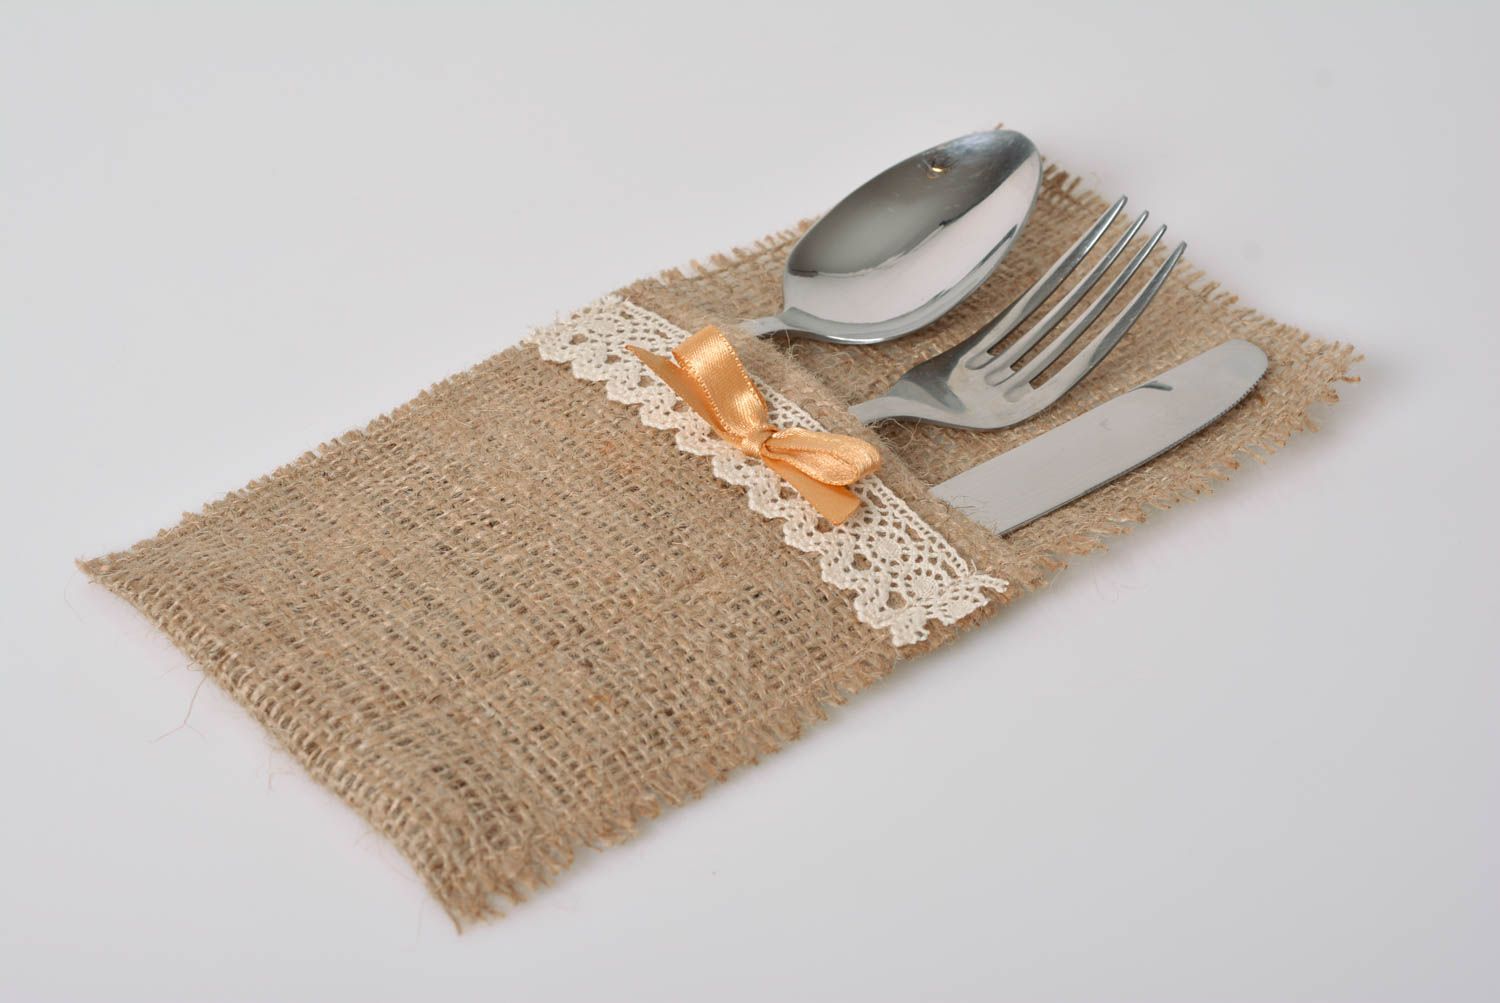 Case for cutlery made of burlap with lace designer accessory for kitchen photo 1